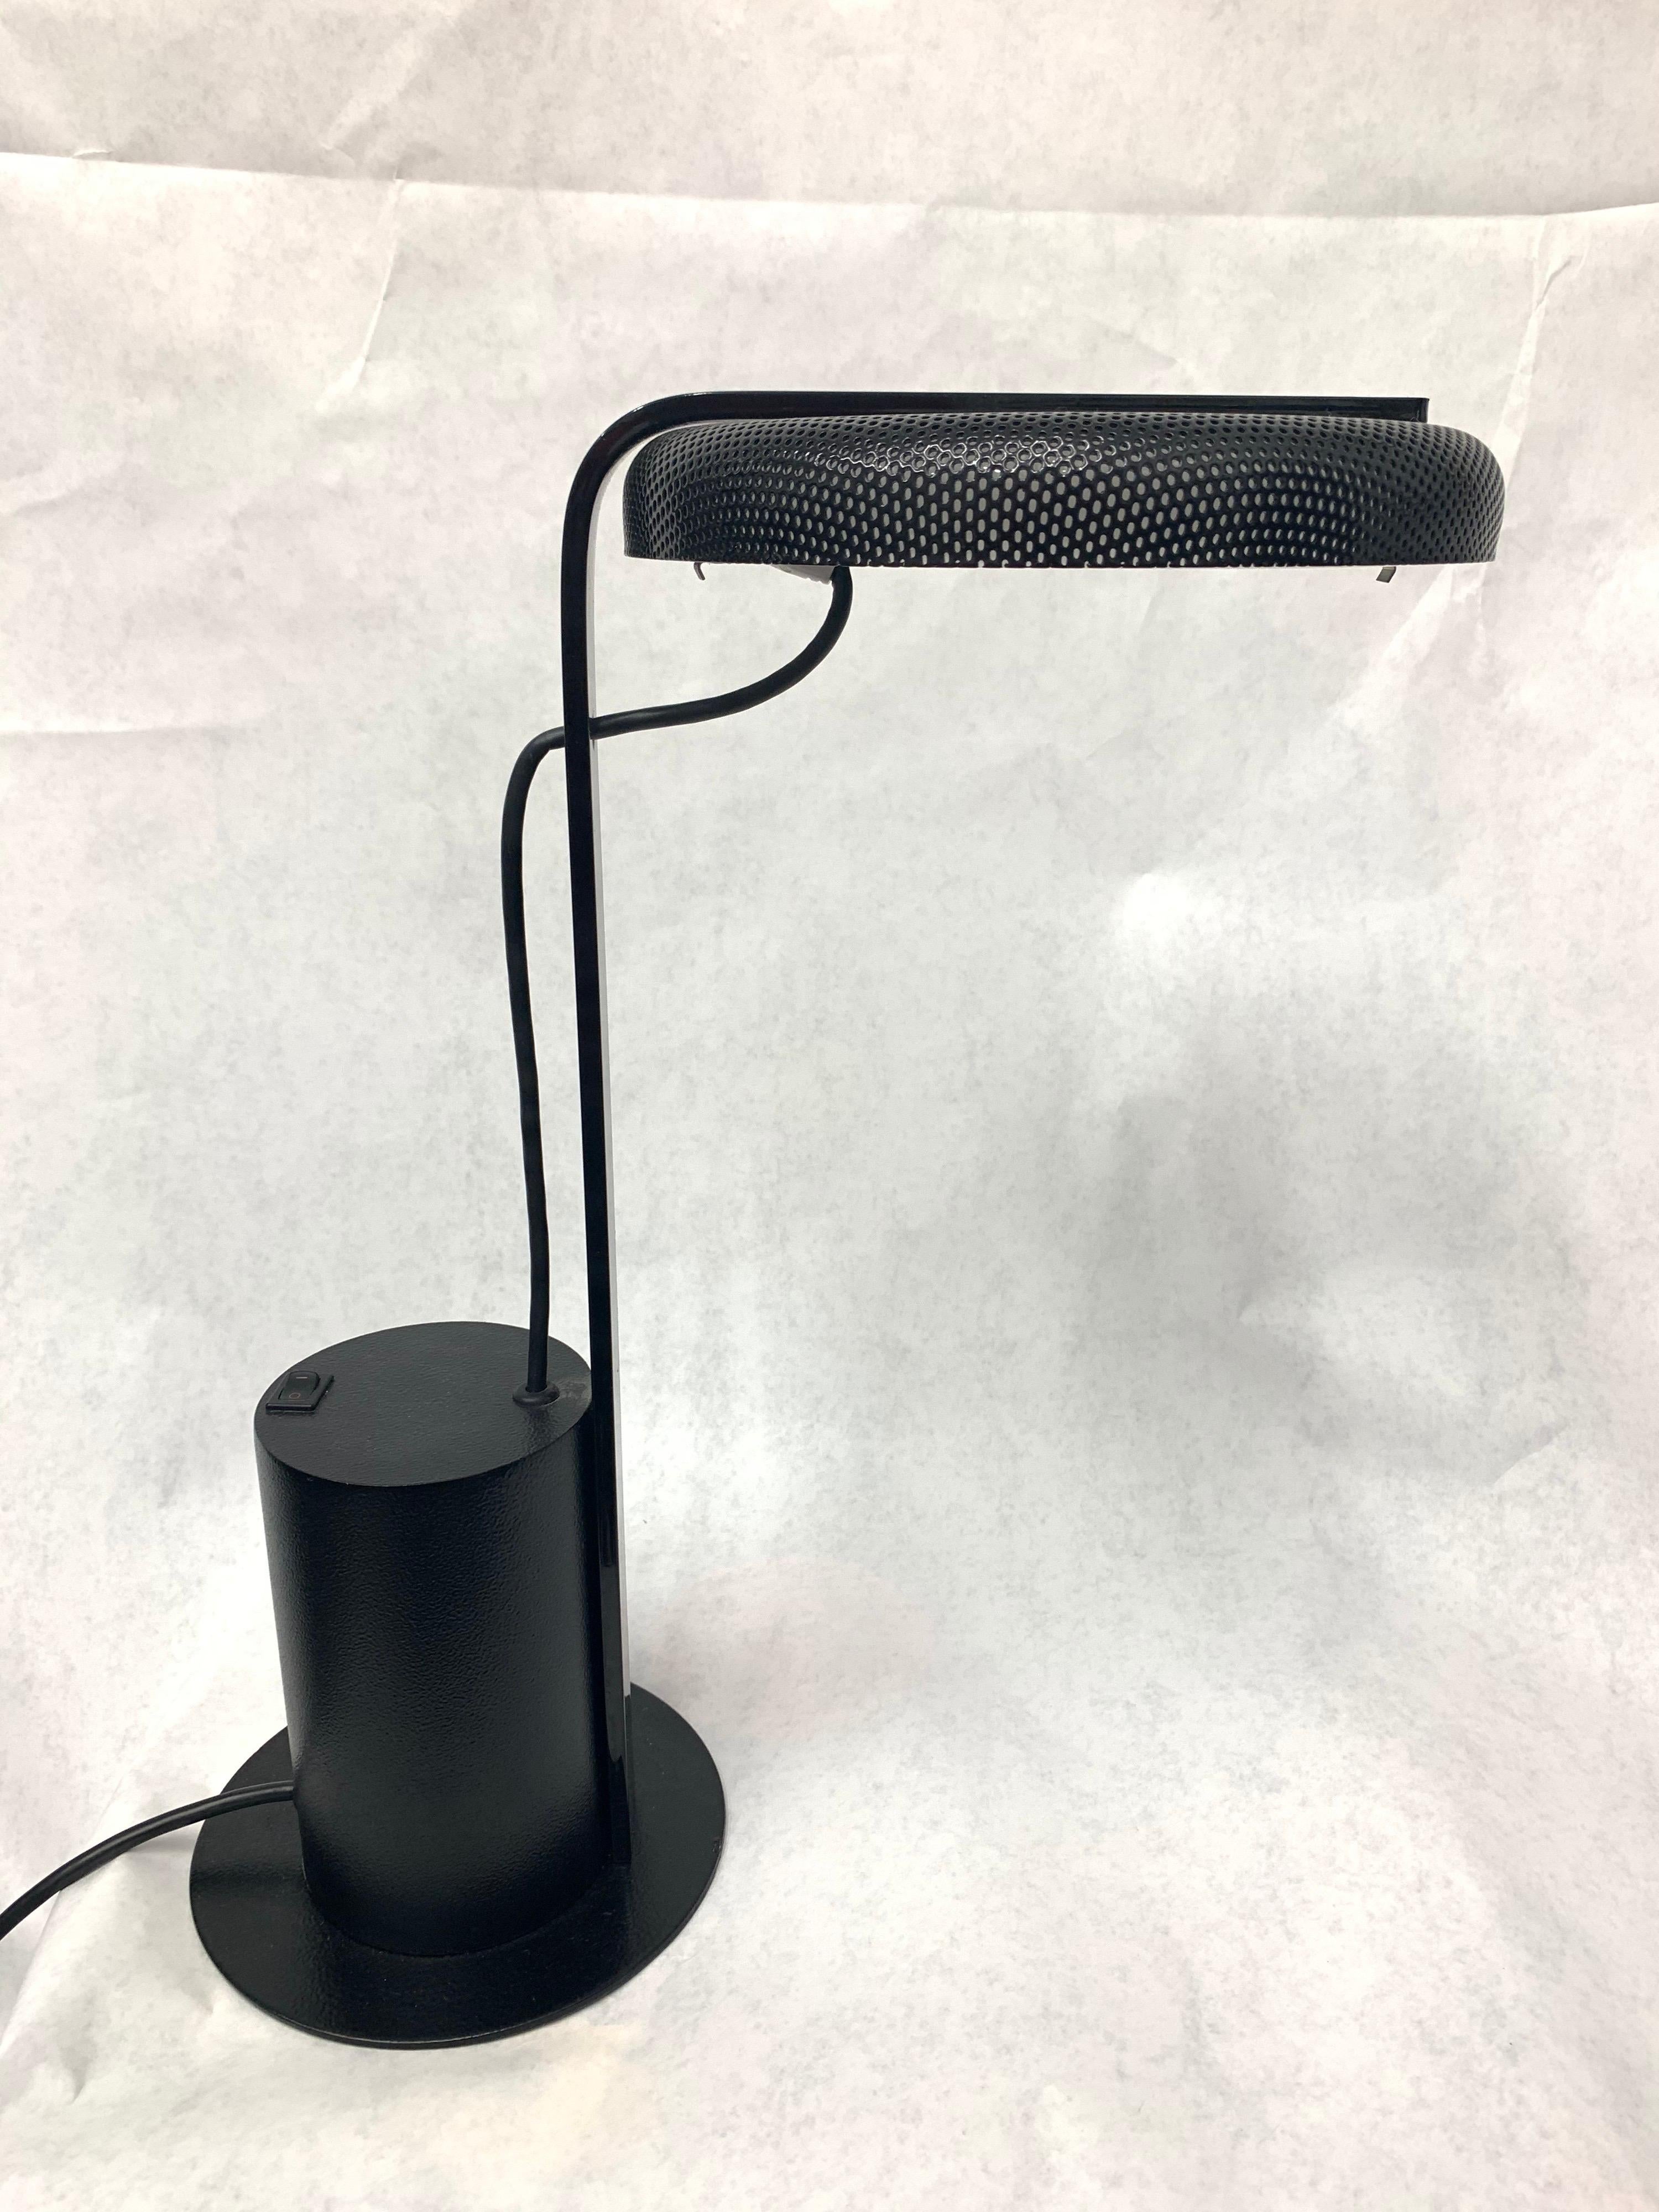 Wonderful and well made Rezek signed desk lamp in all black.
Diameter of mesh perforated diffuser is 9 inches.